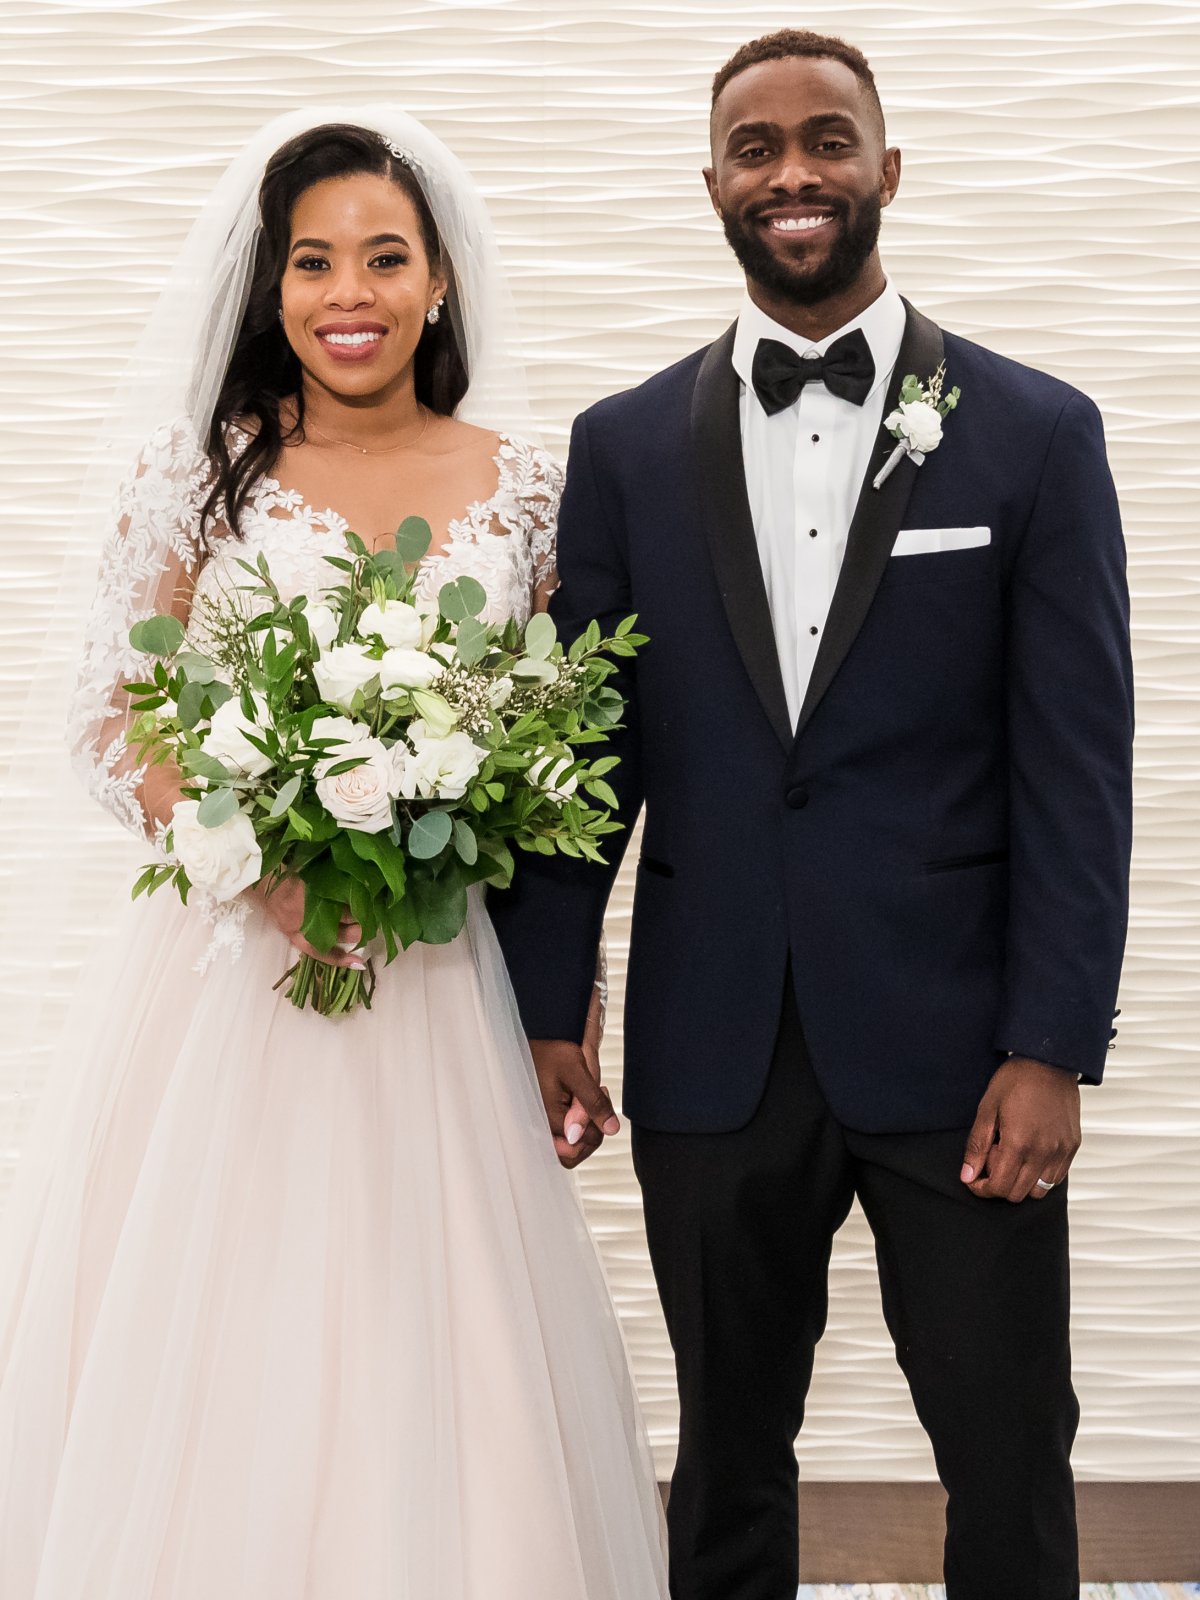 'Married at First Sight' Season 13 Couples Meet the couples and learn